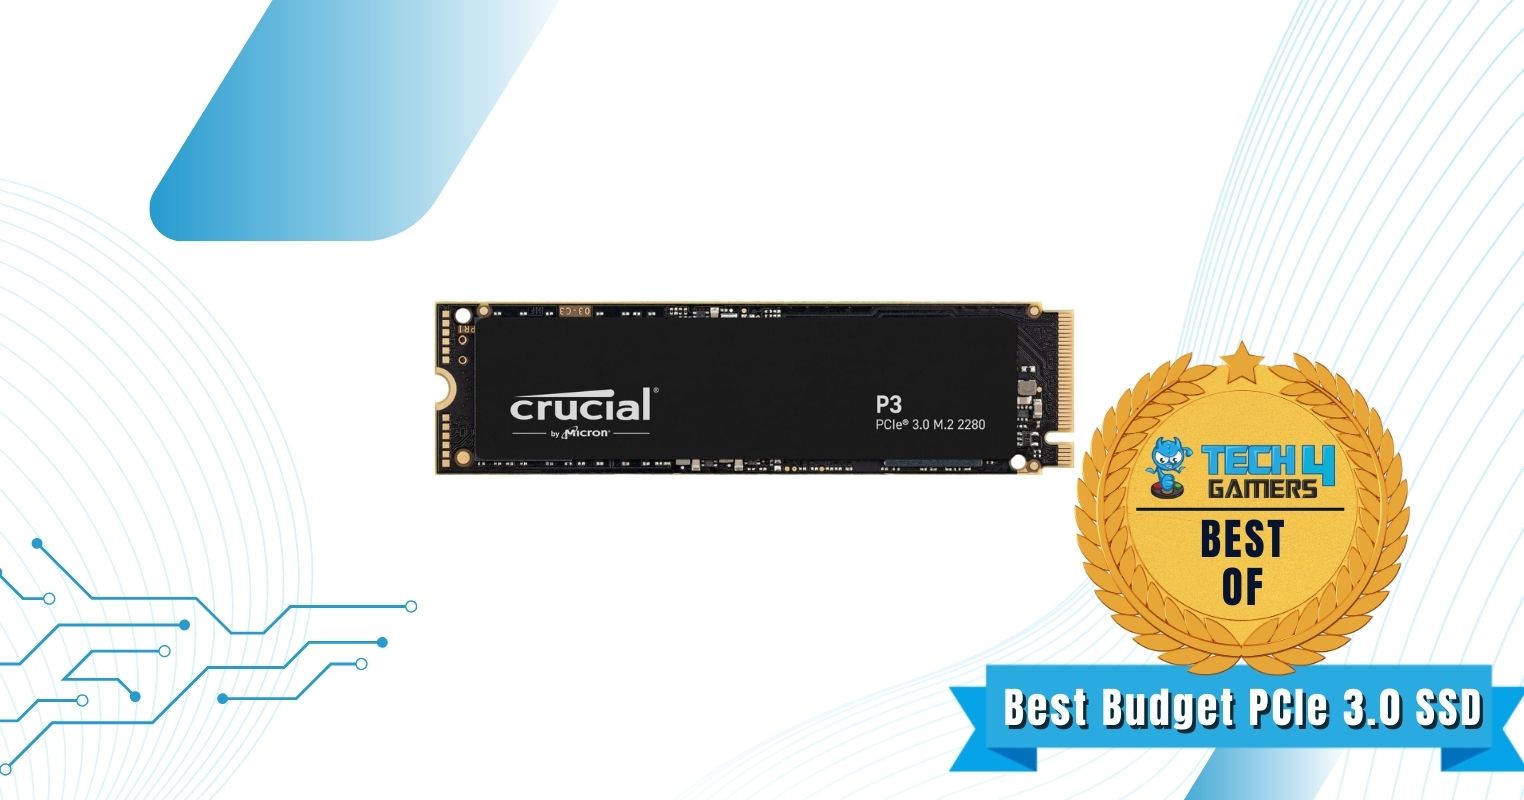 Crucial P3 2TB - Best Budget PCIe 3.0 M.2 SSD For Gaming